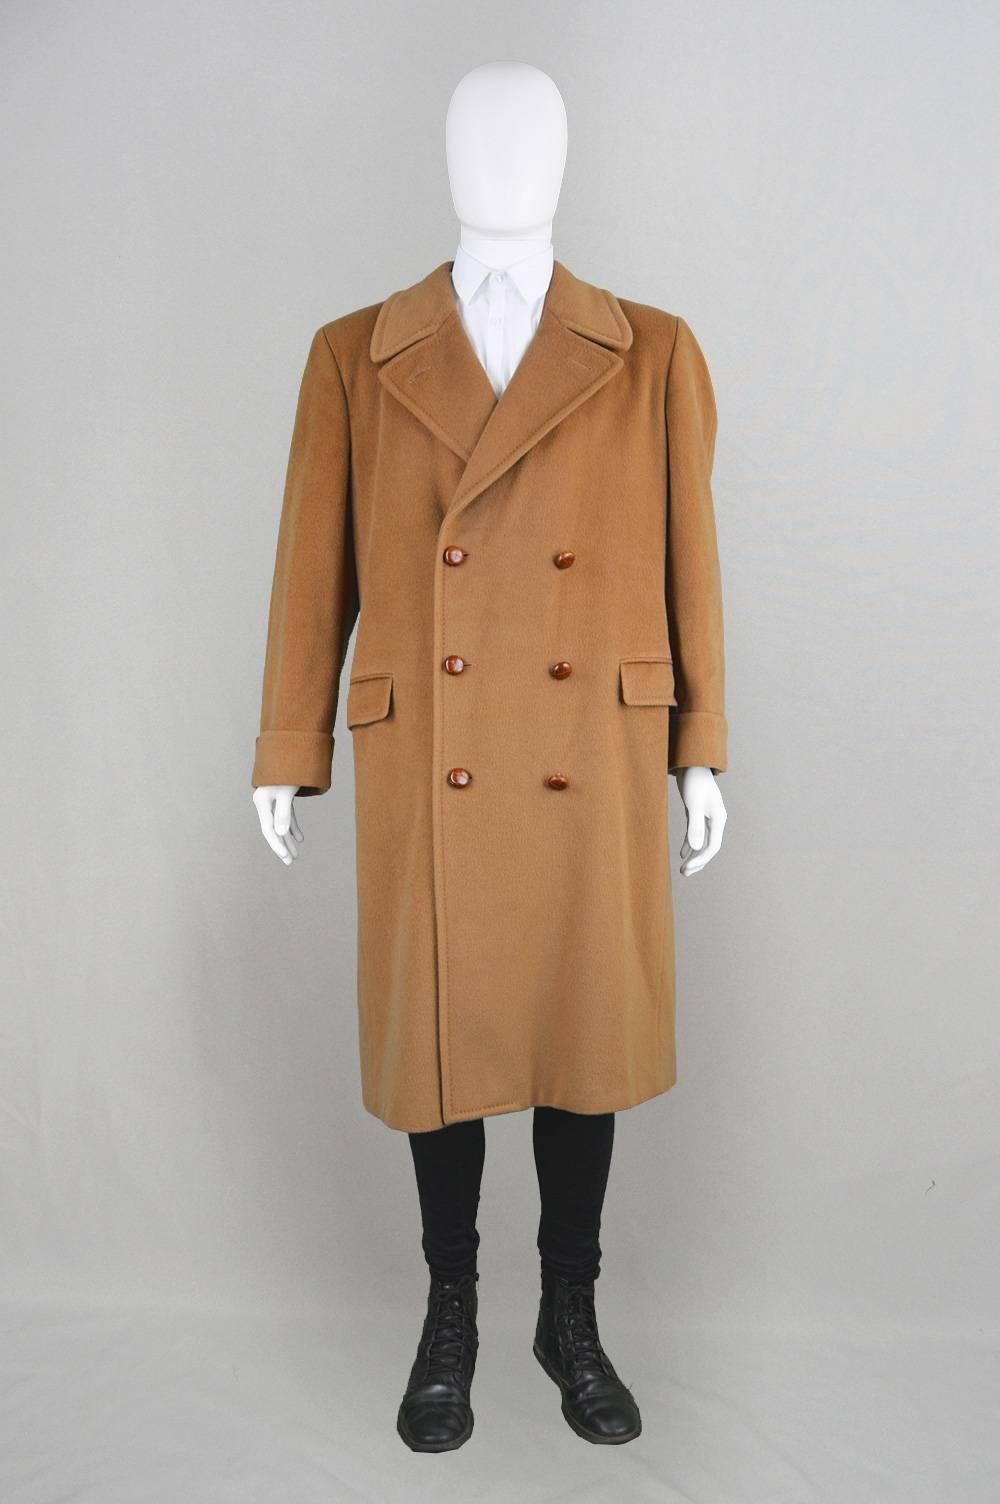 An incredible vintage men's peacoat/ over coat from the 1980s by renowned luxury Italian fashion designer, Valentino, for their men's line - Uomo. In a soft dark camel wool, which feels like its been blended with cashmere. Incredibly